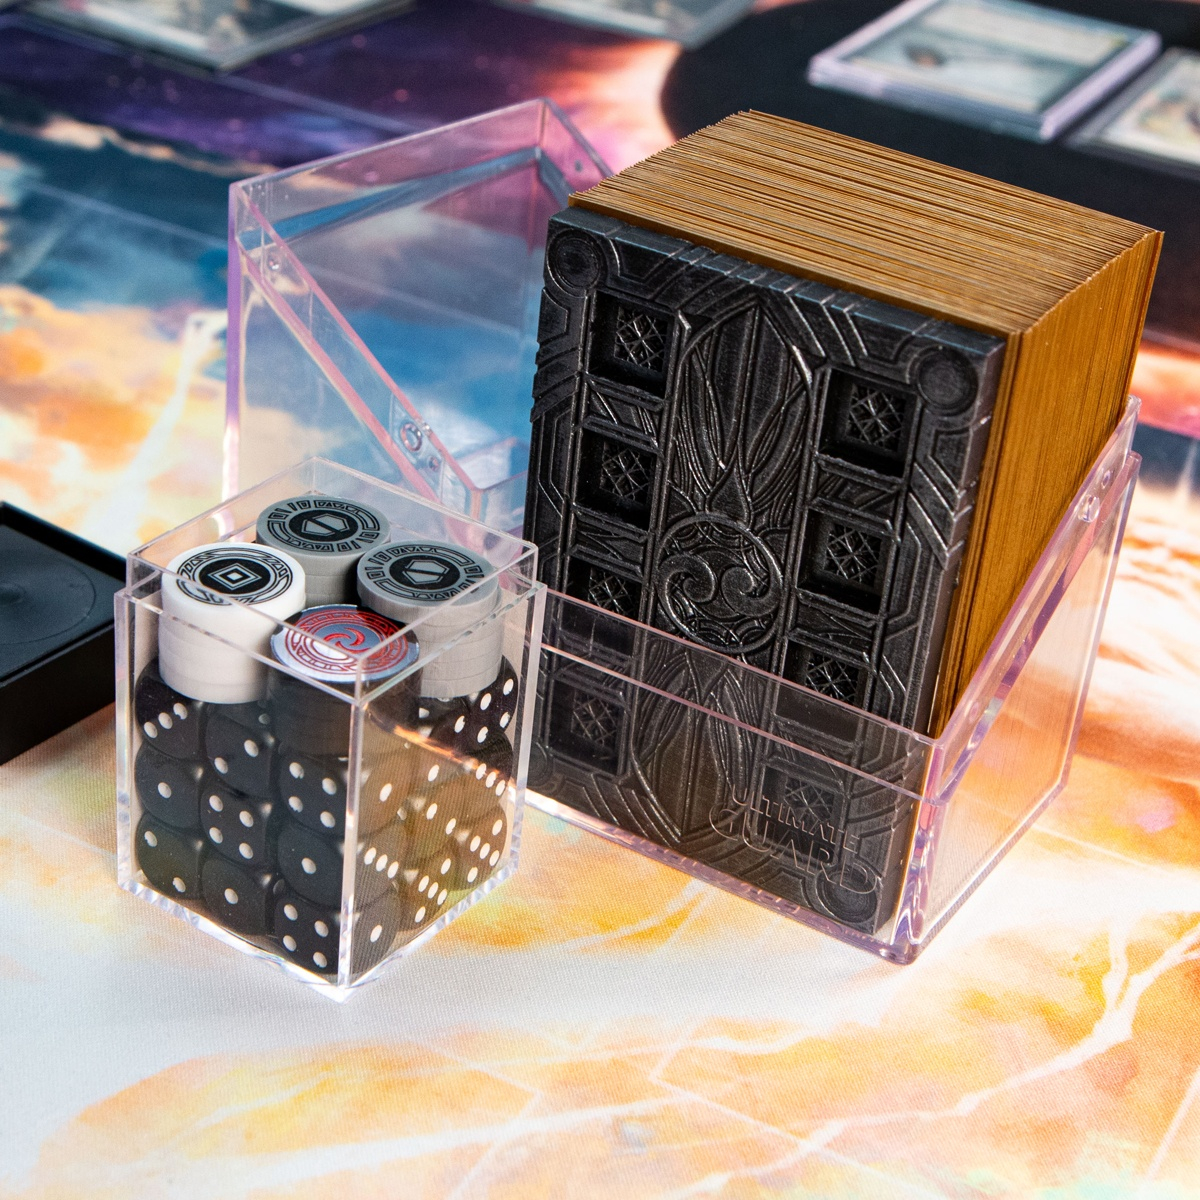 Side view of a 12mm dice set containing all the tokens from the Majestic Token Set as well as a transparent deck box containing a Majestic Dice Board